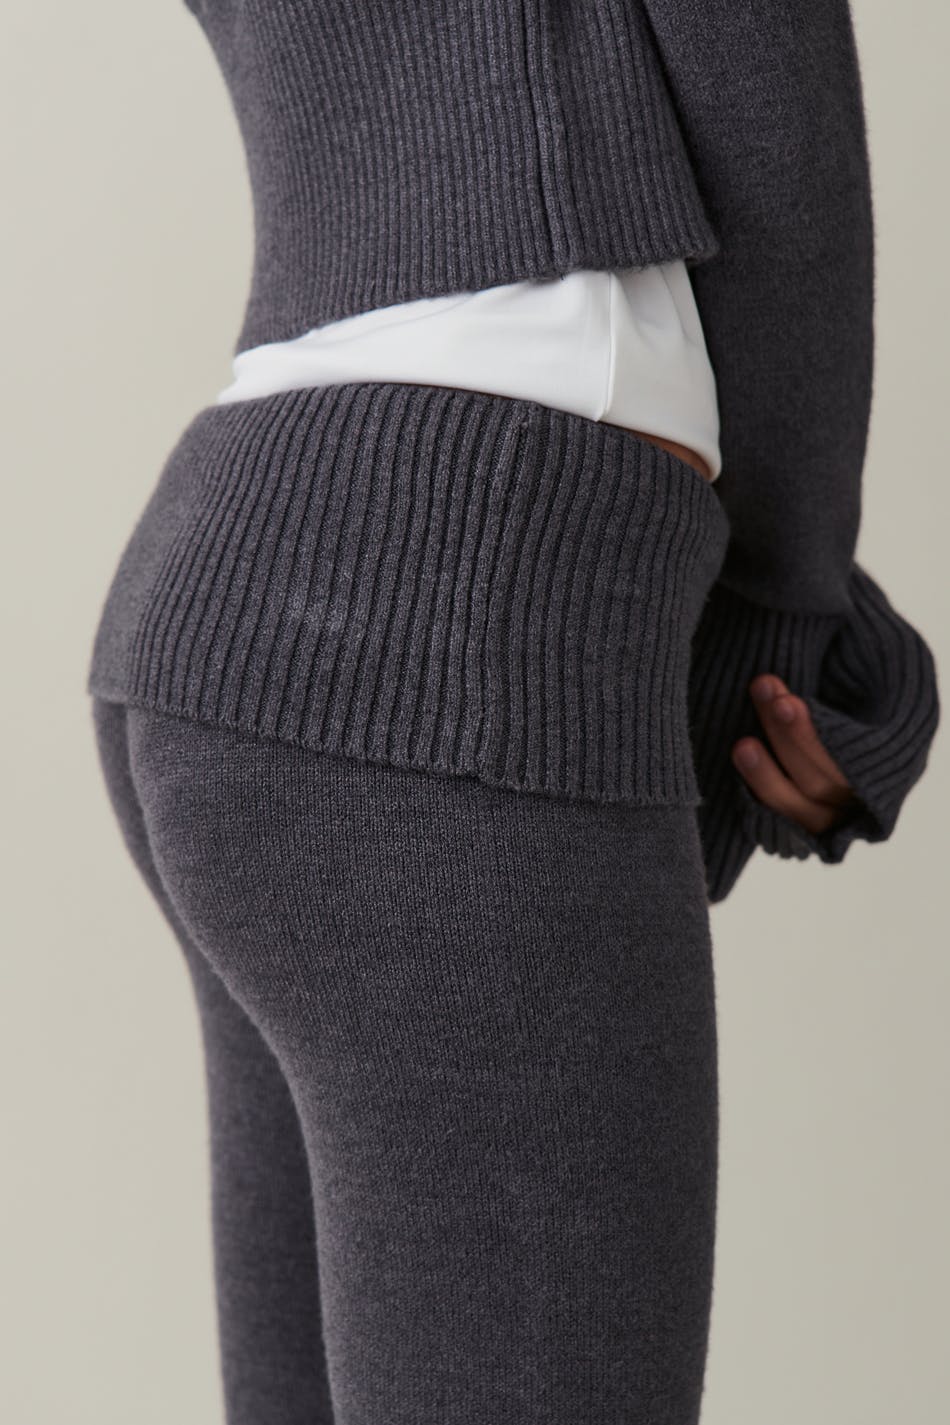 Knitted yoga pants